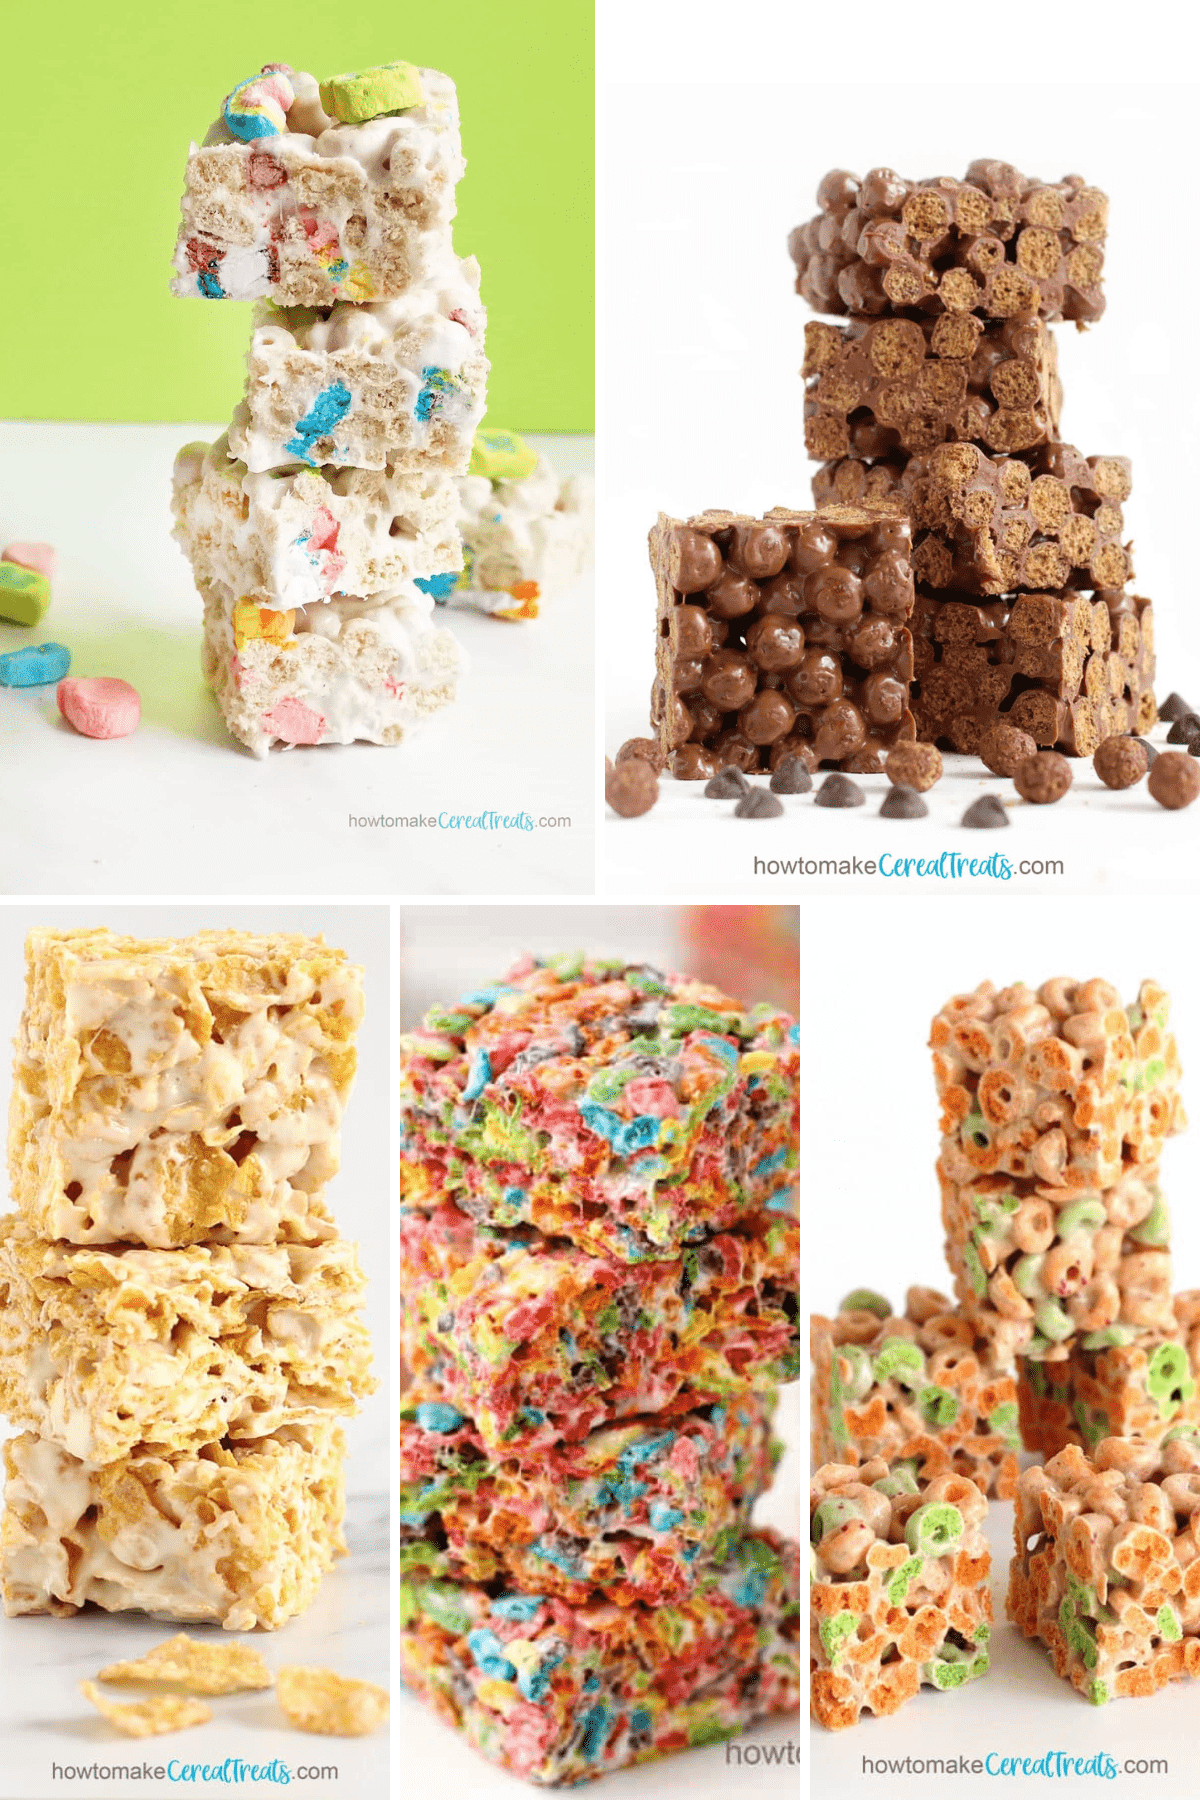 Kid's Cereal treats including Lucky Charms Treats, Cocoa Puffs Treats, Fruit Pebbles Treats, and more.